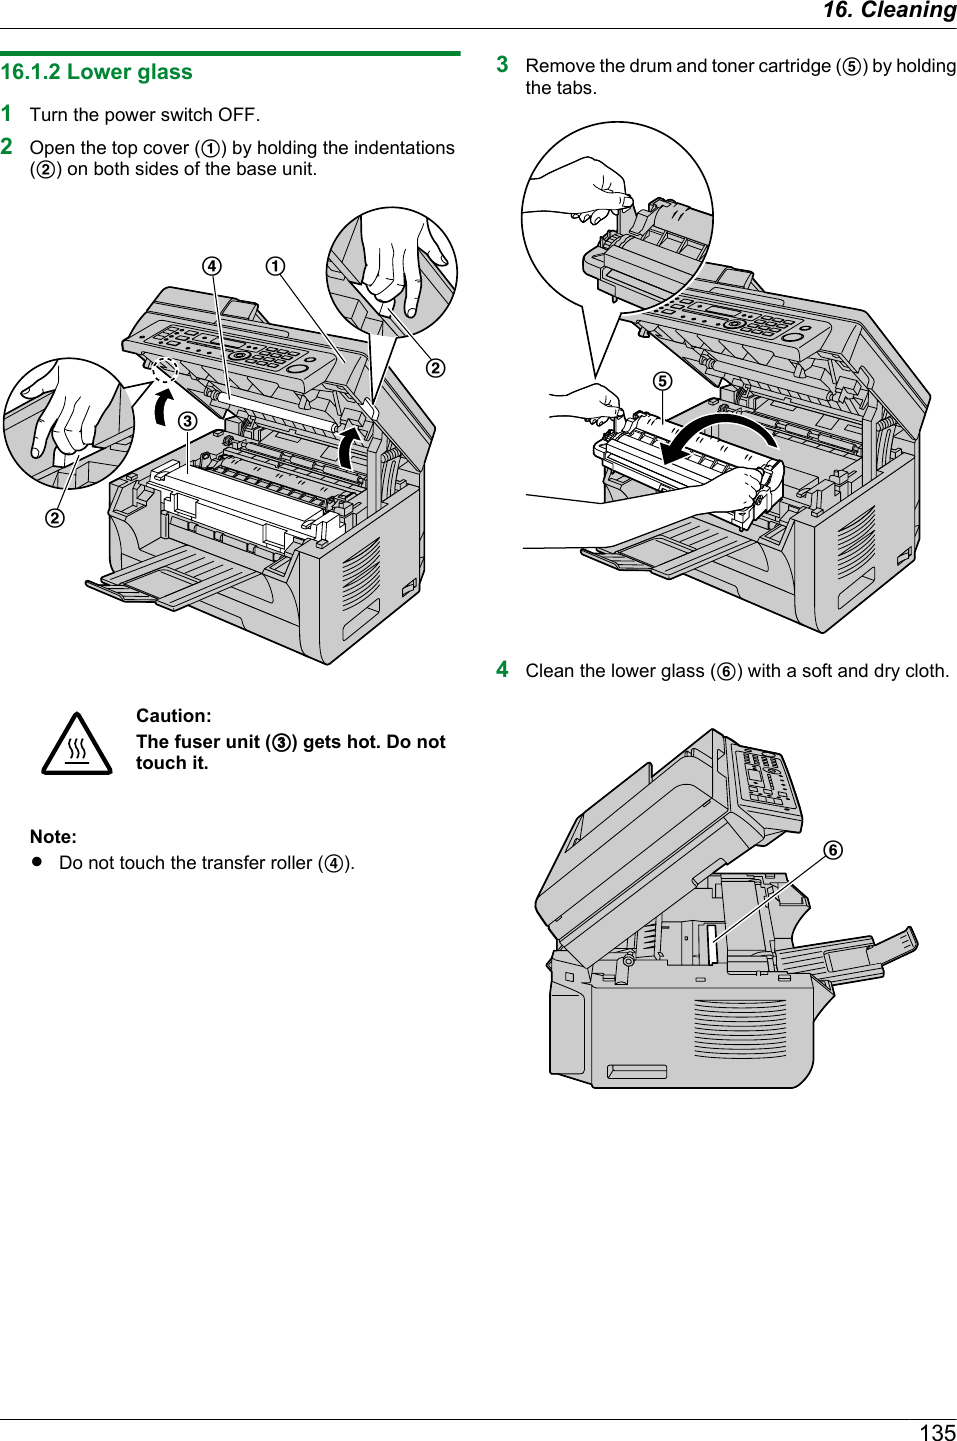 16.1.2 Lower glass1Turn the power switch OFF.2Open the top cover (A) by holding the indentations(B) on both sides of the base unit.DABBCCaution:The fuser unit (C) gets hot. Do nottouch it.Note:RDo not touch the transfer roller (D).3Remove the drum and toner cartridge (E) by holdingthe tabs.E4Clean the lower glass (F) with a soft and dry cloth.F13516. Cleaning